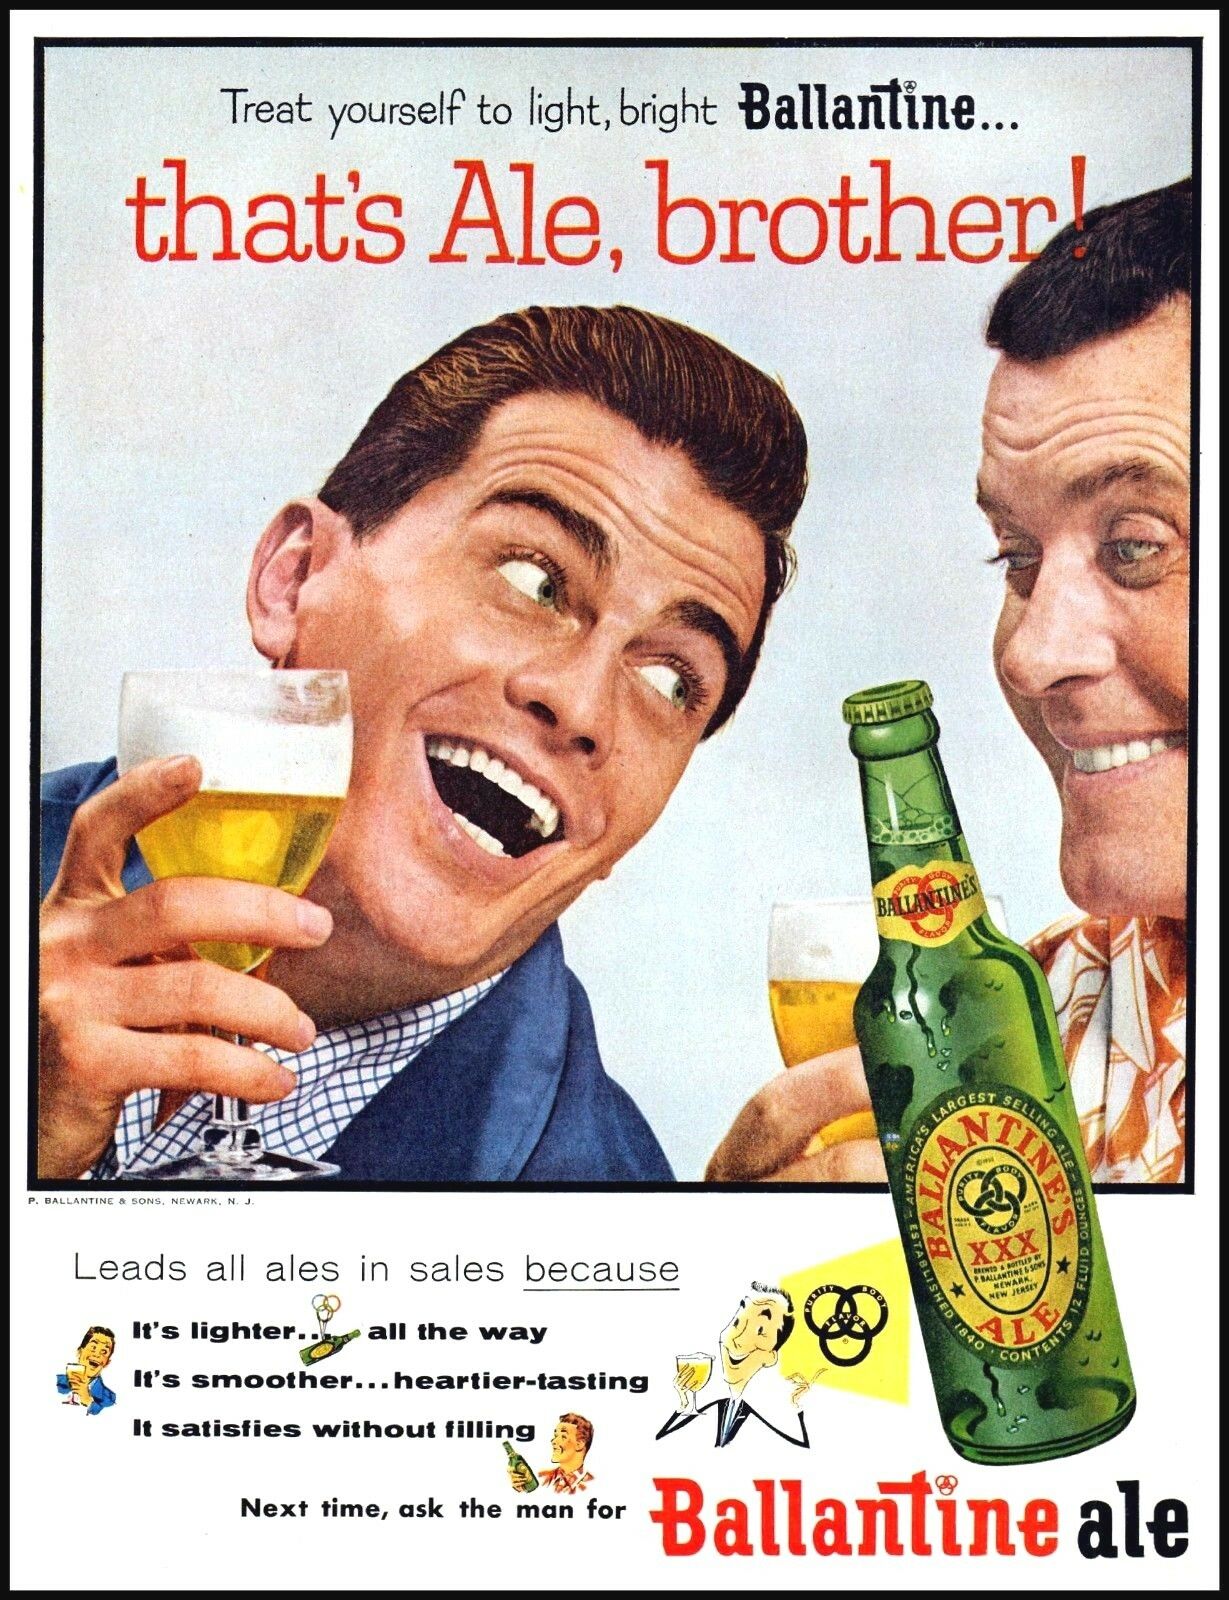 1955 Ballantine Ale Brewery Two Men Brothers Vintage Photo Print Ad  Adl24